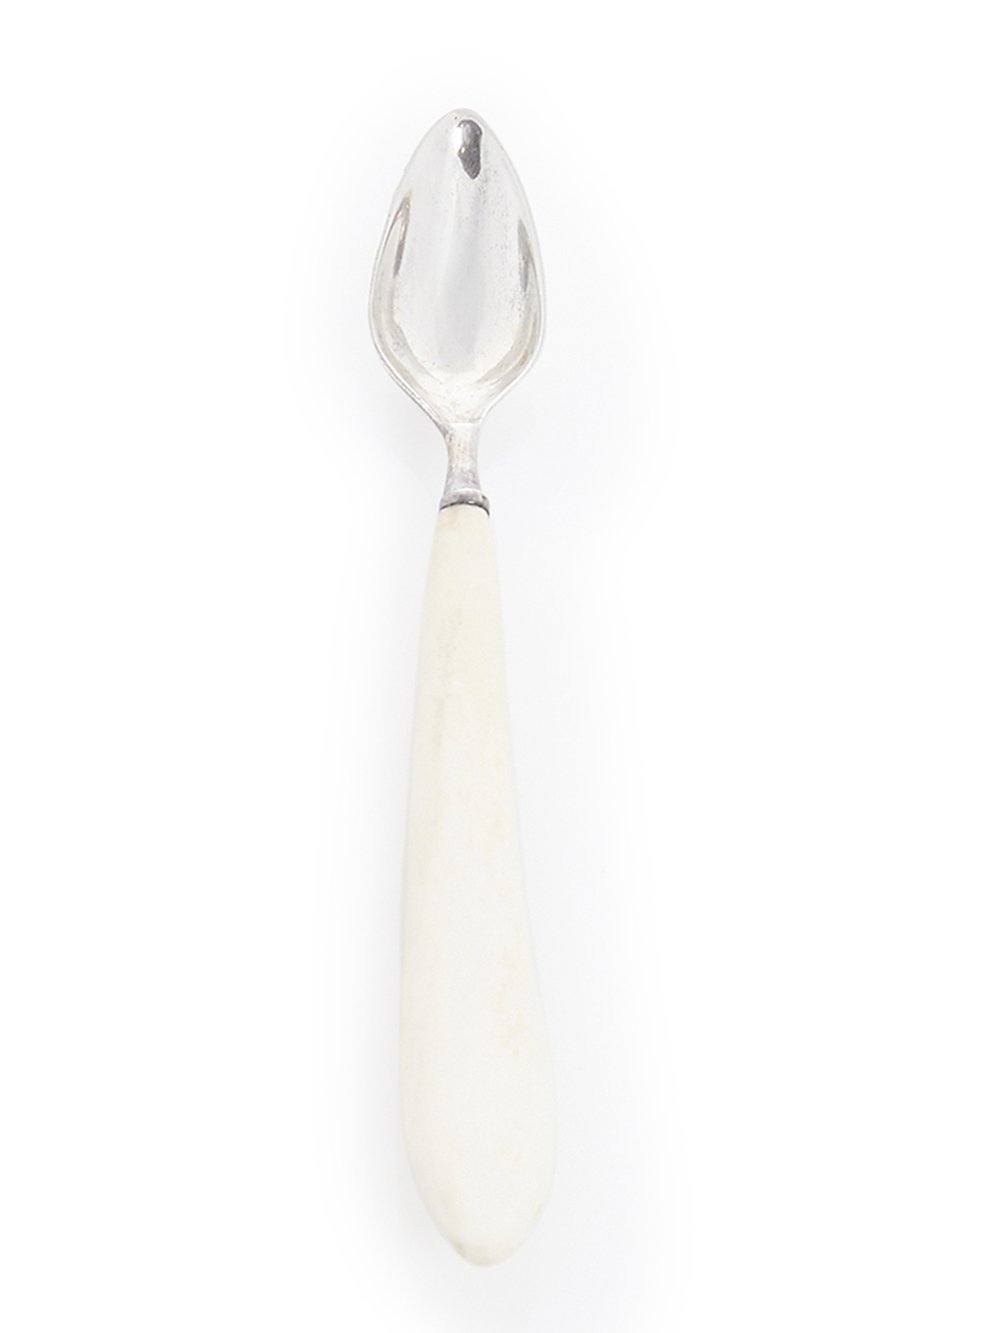 RICK OWENS SPOON FEATURES A SMALL OVAL SHAPE STERLING TOP AND A SLIM, NATURAL COLOR BONE HANDLE.